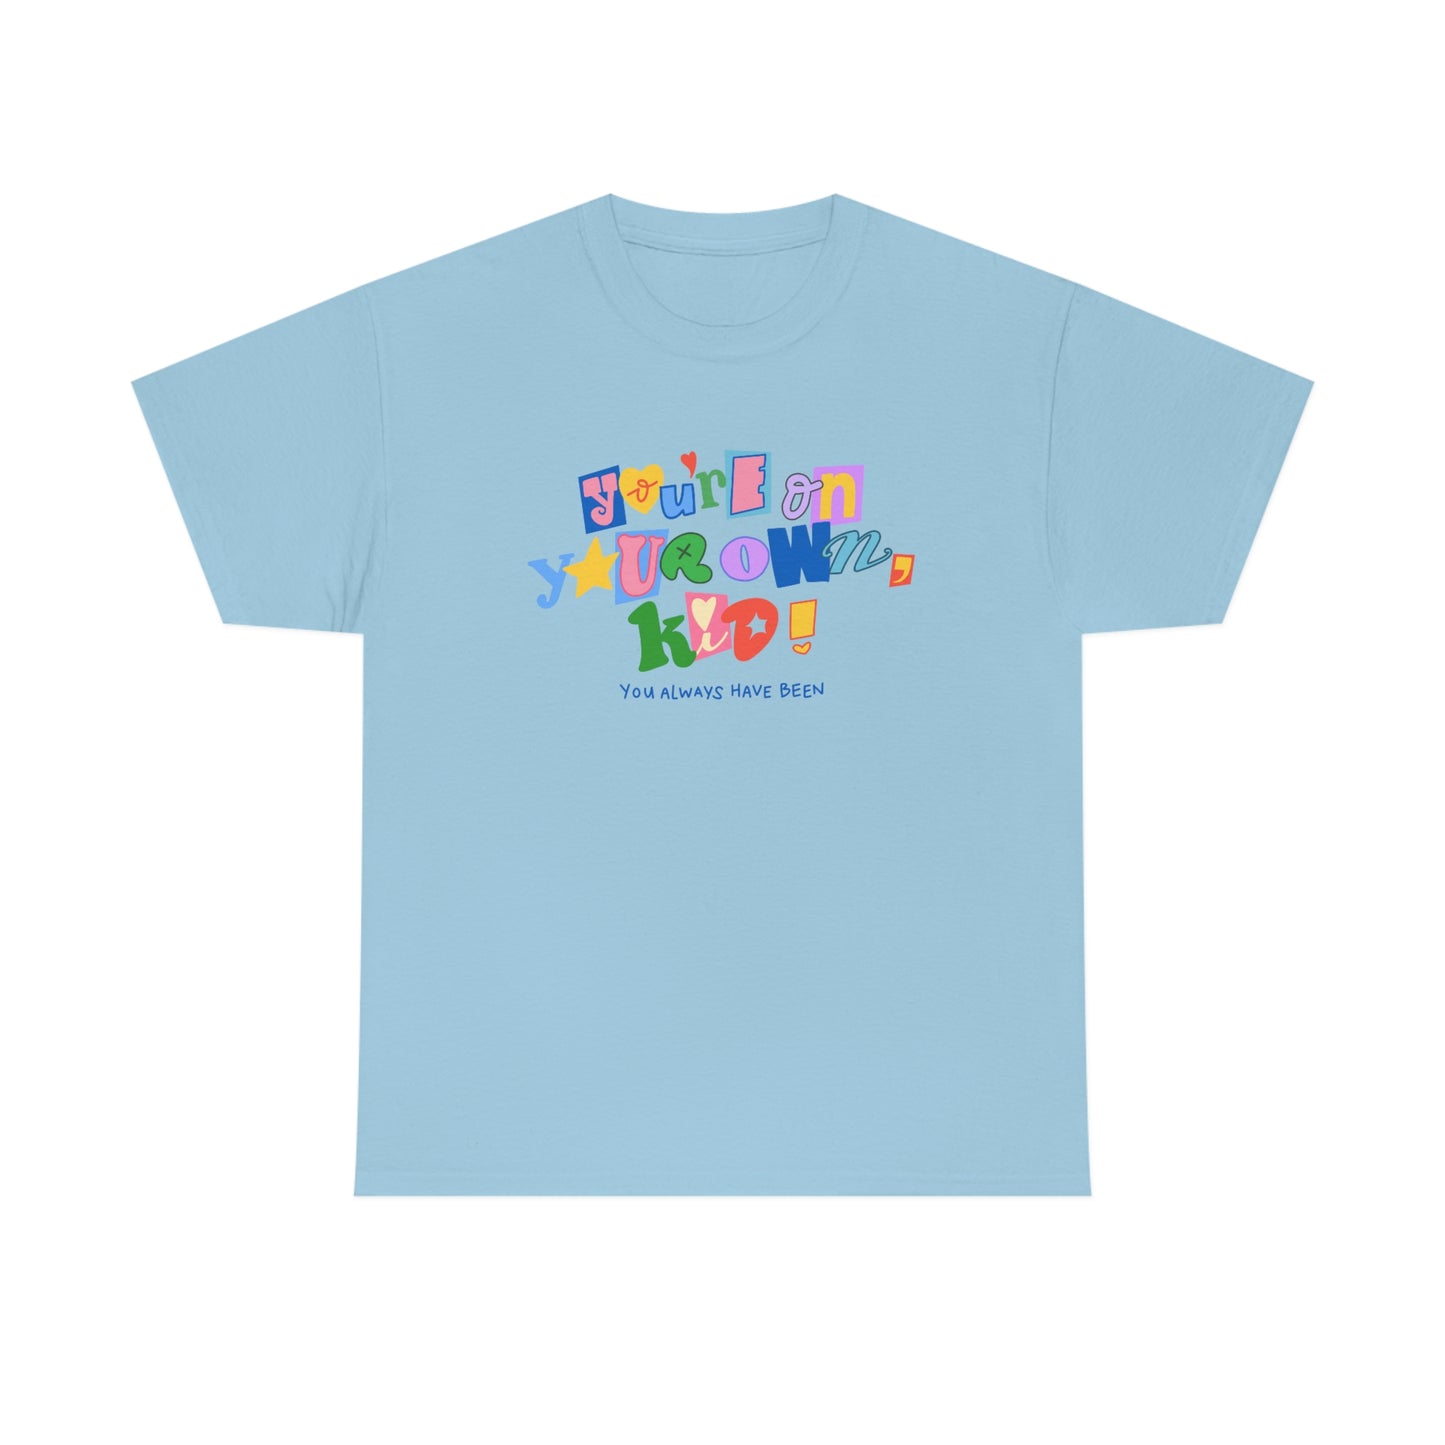 Your You\'re studio Own – On regular at seven Kid tee